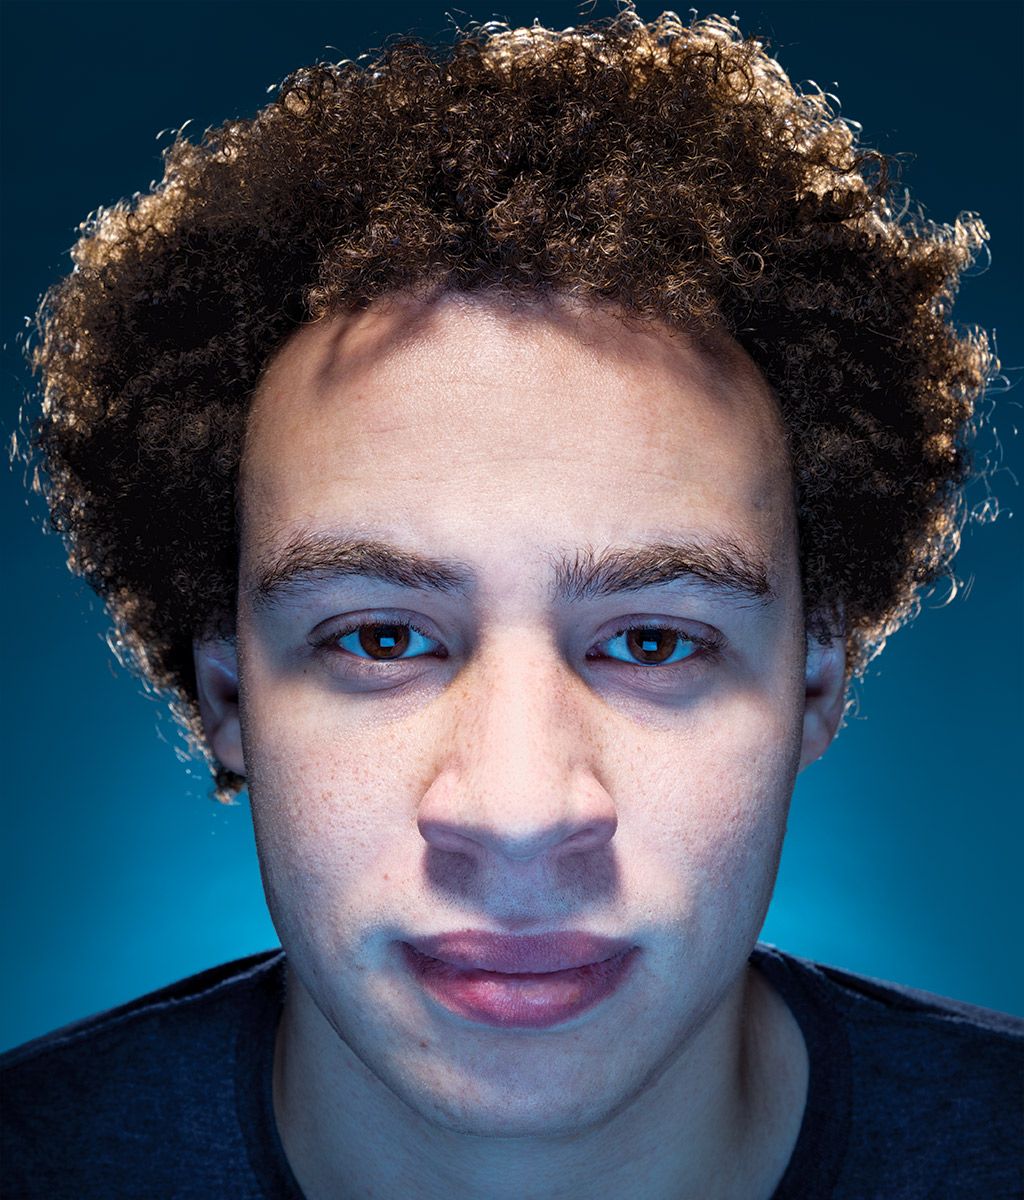 Marcus Hutchins stopped one of the most dangerous cyberattacks ever. Then the FBI arrested him. Does a hacker hero always have to have a past?